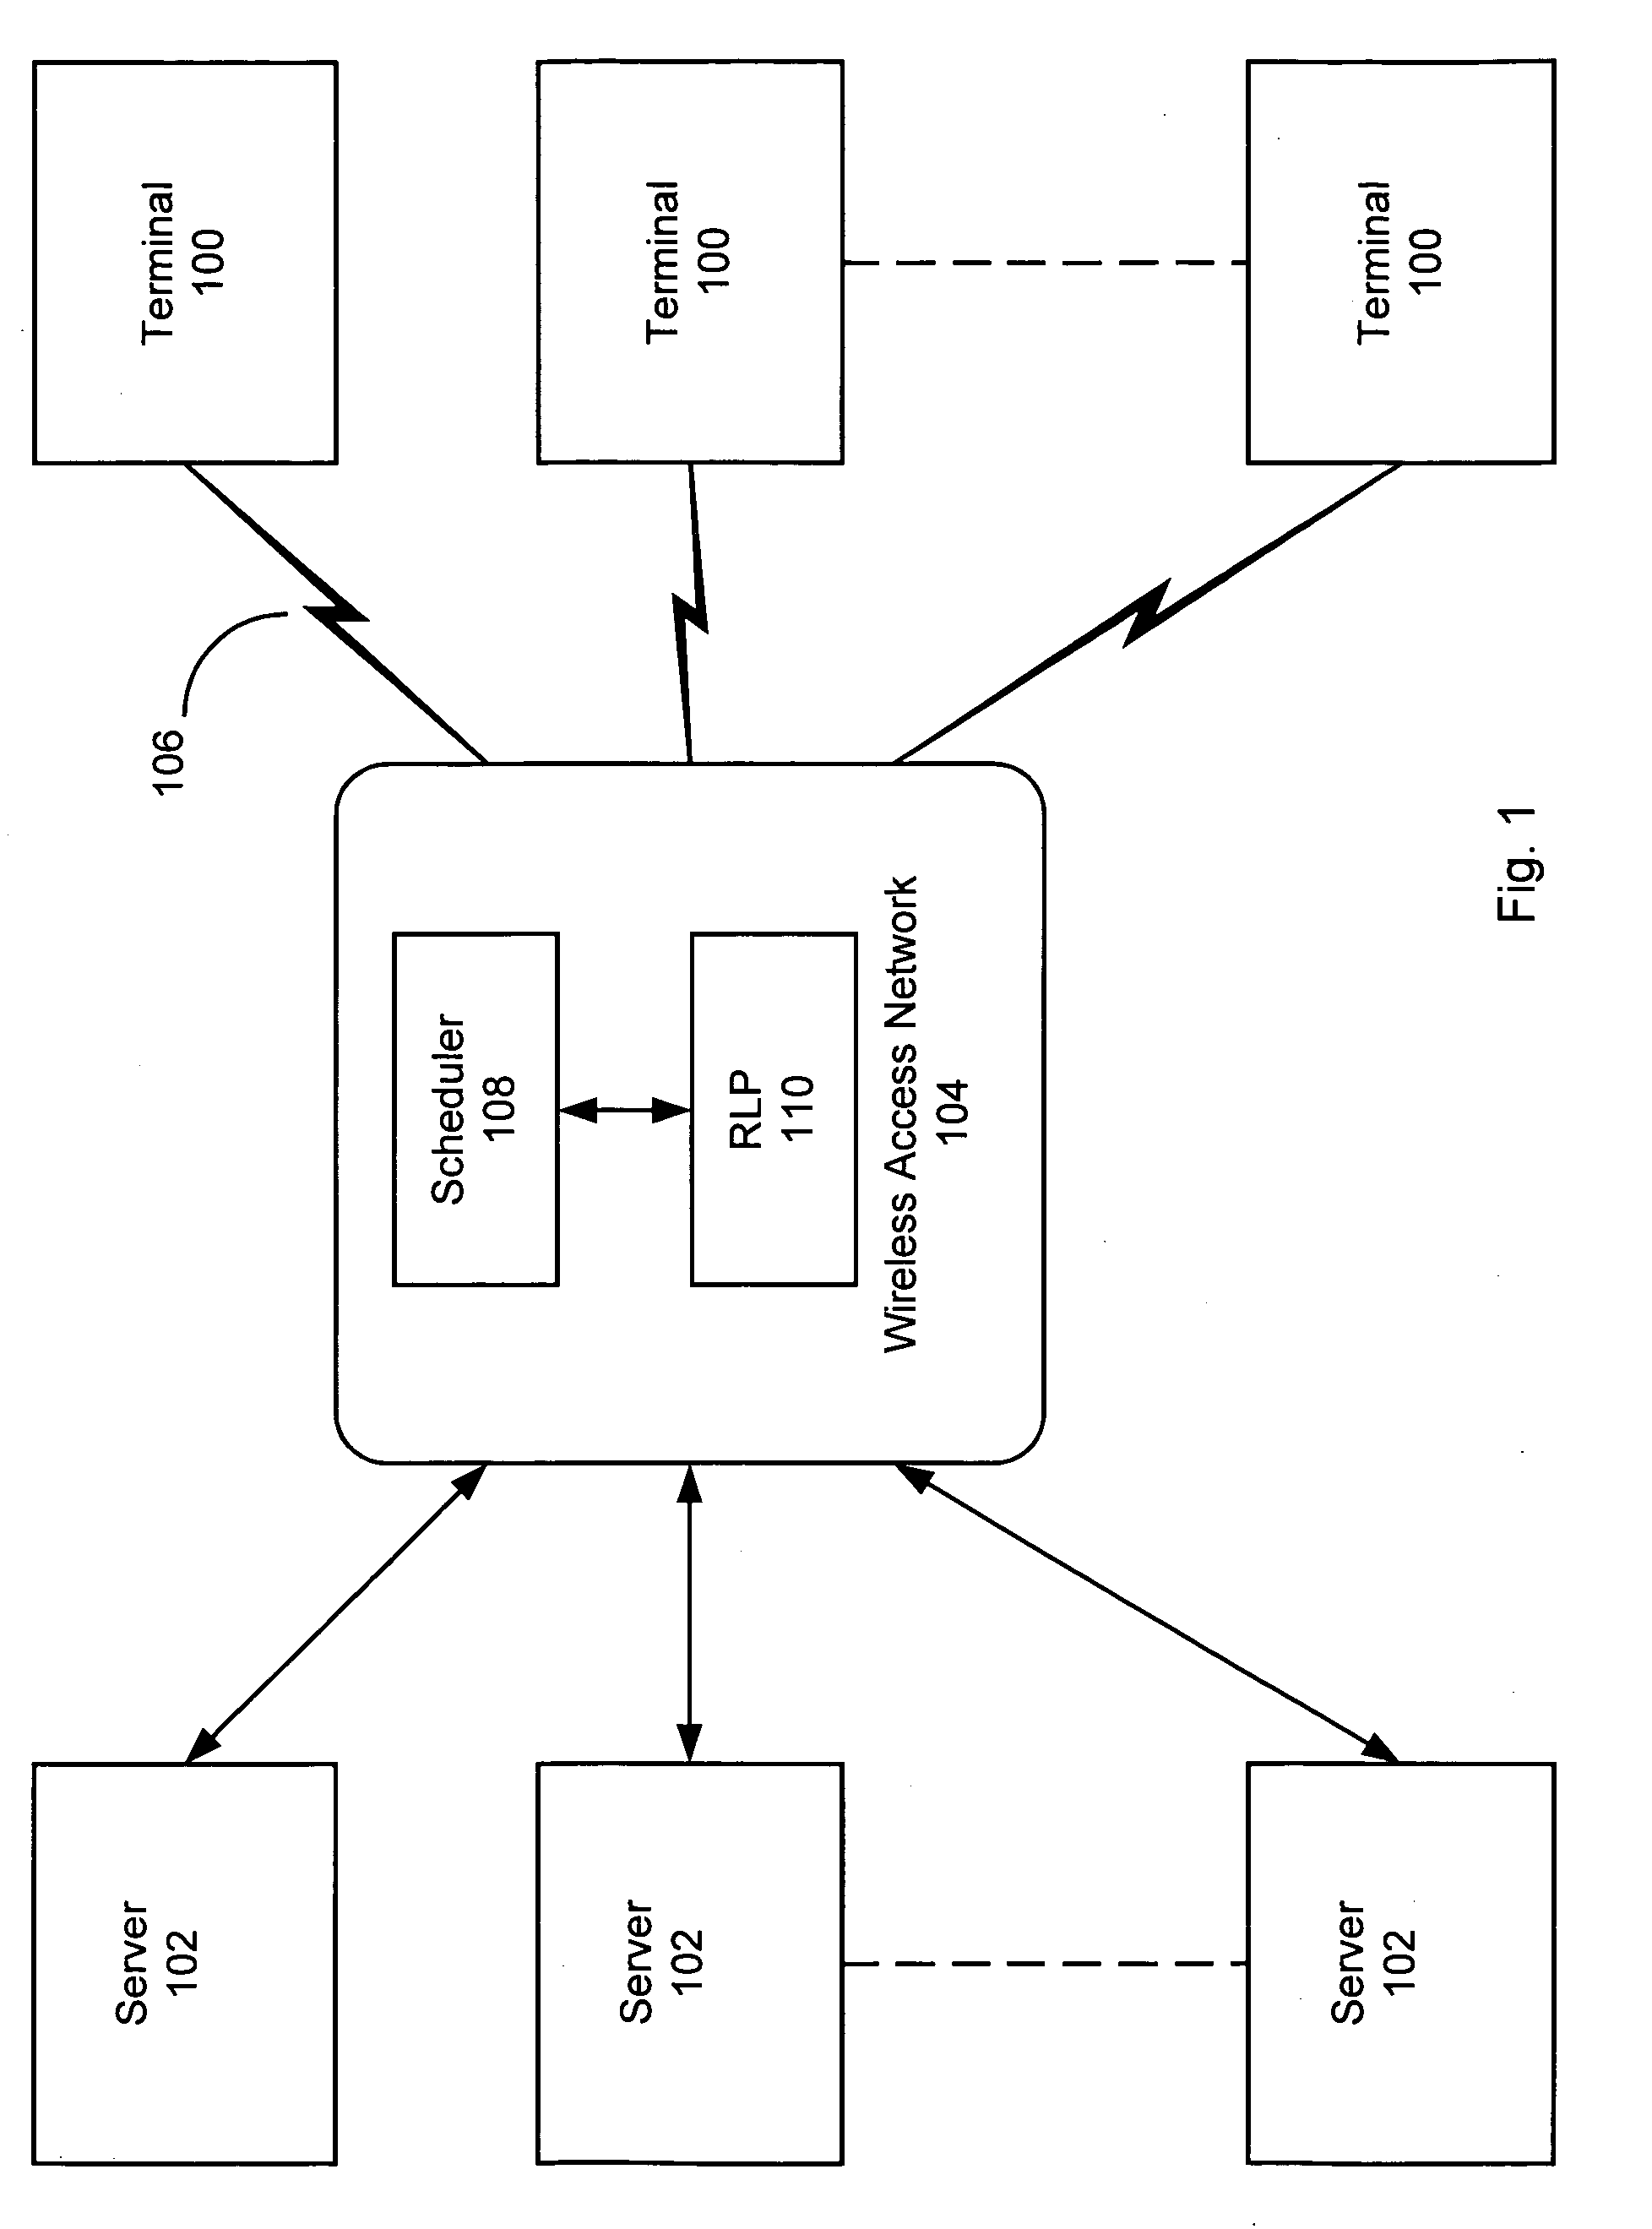 Dynamic automatic retransmission request in wireless access networks